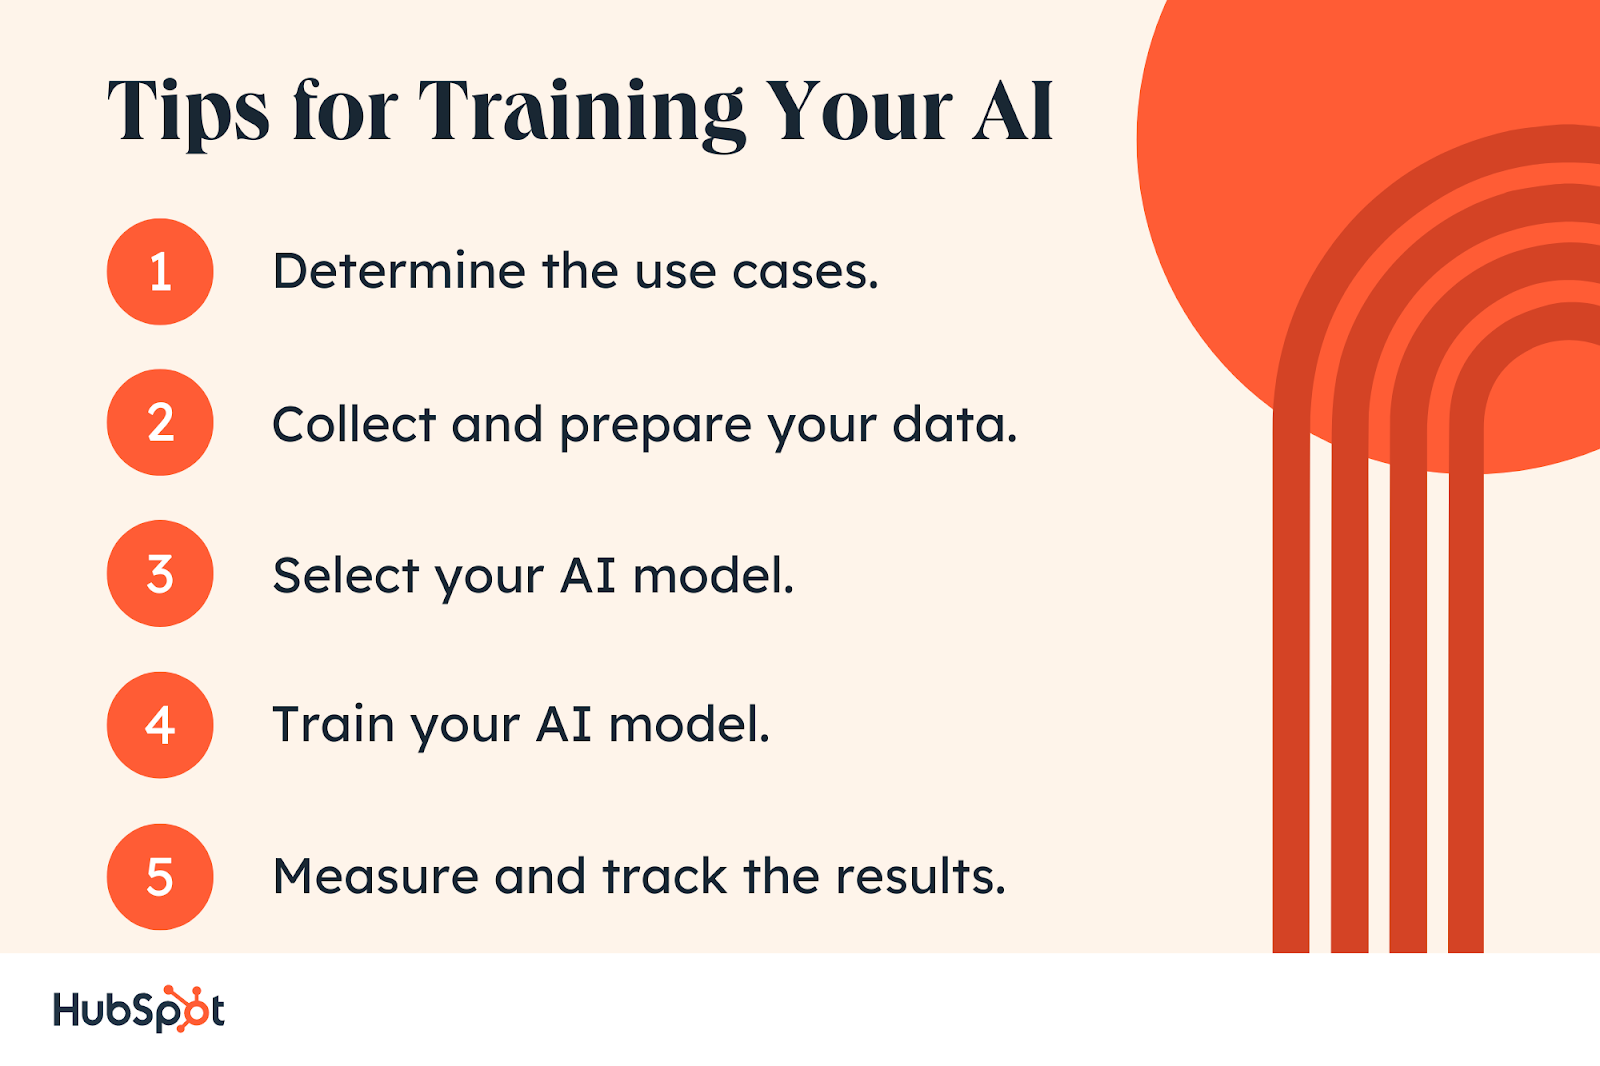 Tips for Training Your AI. Determine the use cases. Collect and prepare your data. Select your AI model. Train your AI model. Measure and track the results.